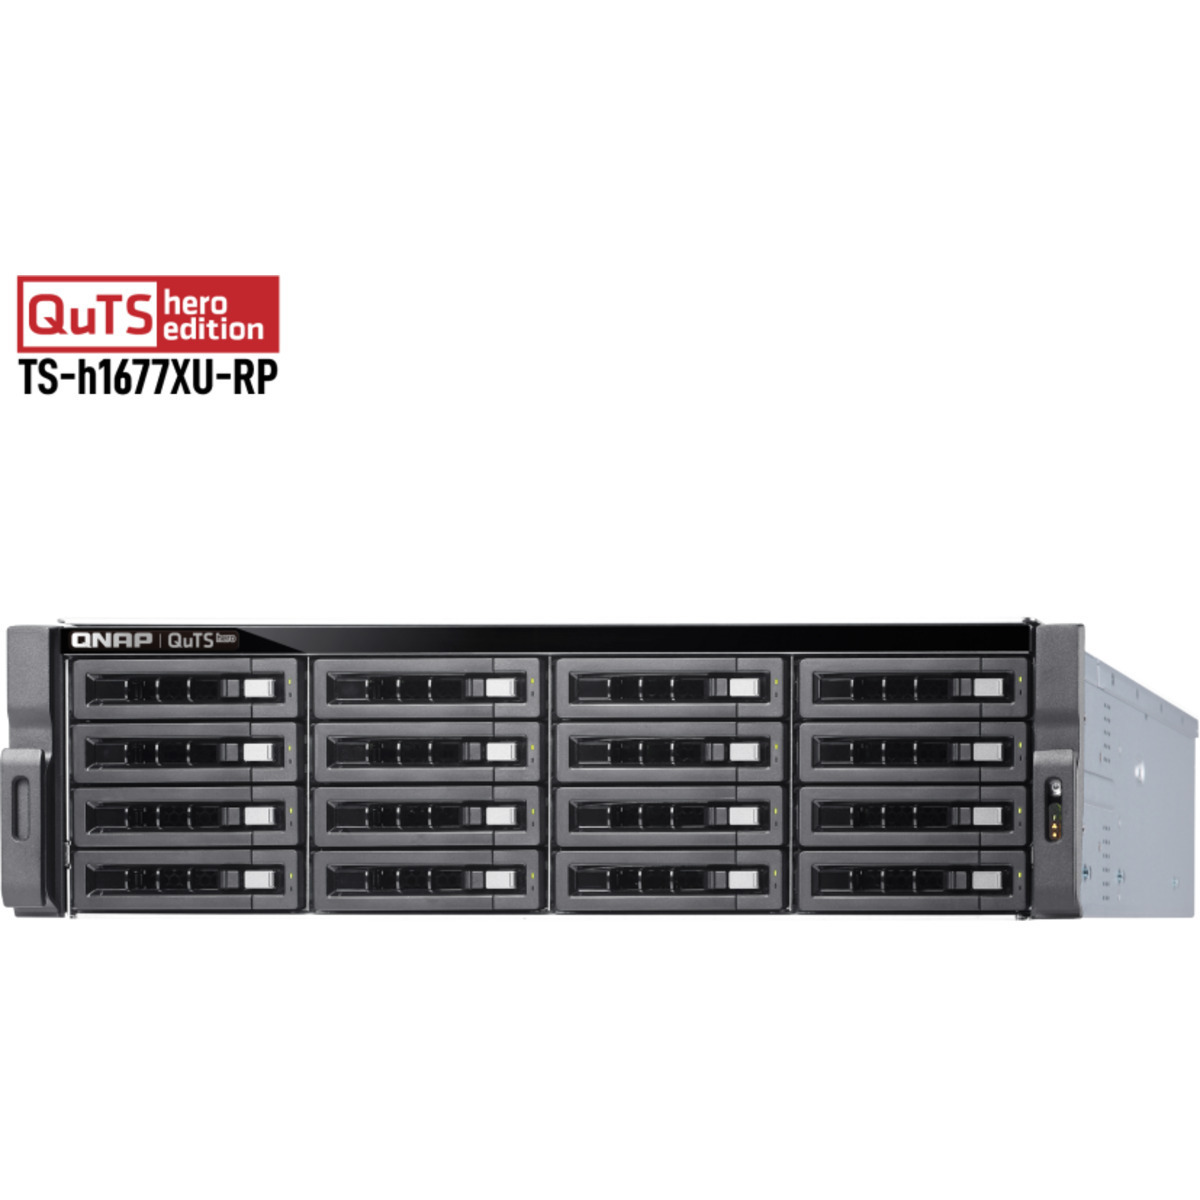 buy $14161 QNAP TS-h1677XU-RP QuTS hero Edition 352tb RackMount NAS - Network Attached Storage Device 16x22000gb Western Digital Red Pro WD221KFGX 3.5 7200rpm SATA 6Gb/s HDD NAS Class Drives Installed - Burn-In Tested - ON SALE - nas headquarters buy network attached storage server device das new raid-5 free shipping simply usa TS-h1677XU-RP QuTS hero Edition